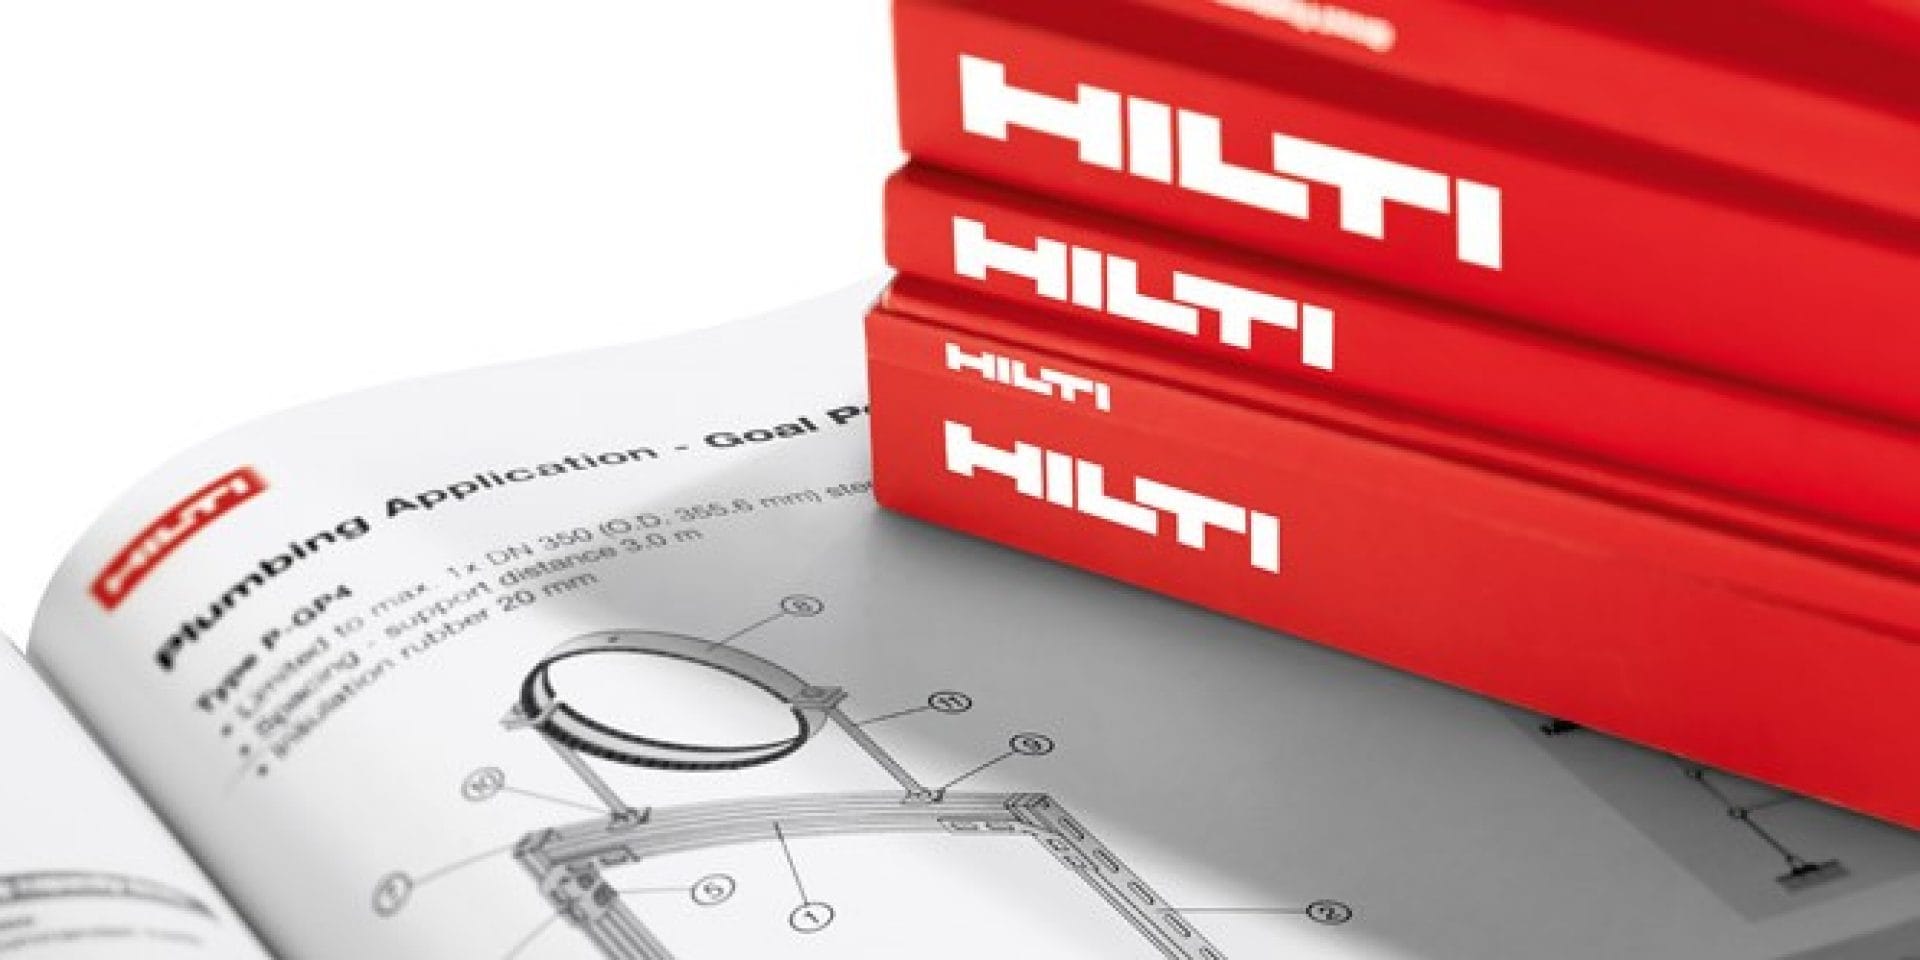 Hilti technical literature for engineers